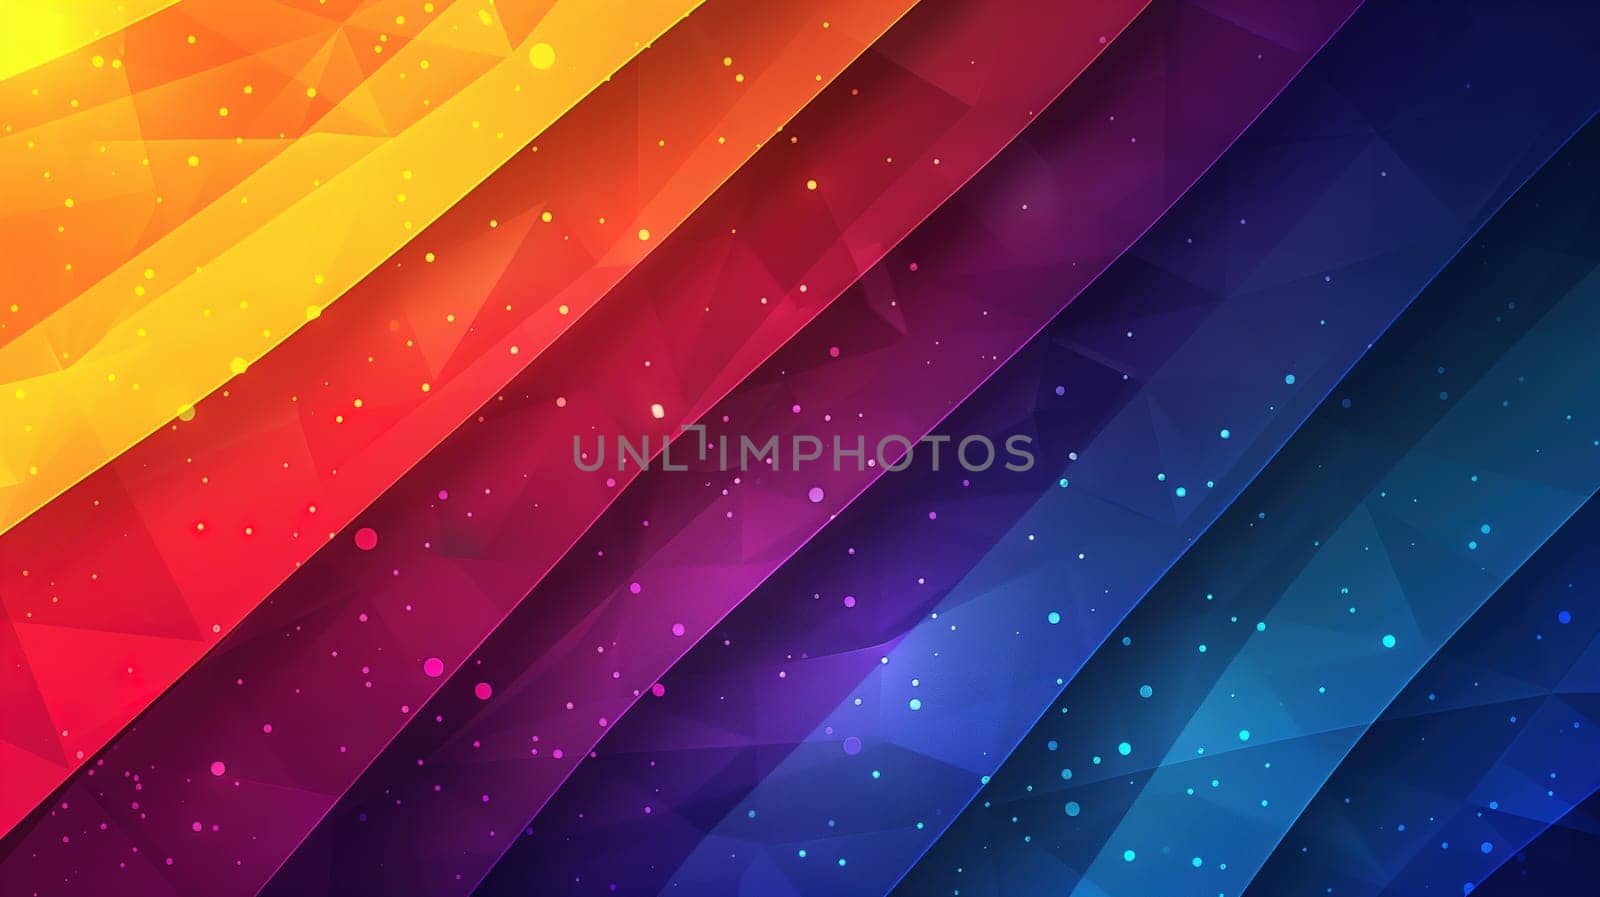 A vibrant rainbow-colored background adorned with twinkling stars in various sizes. The stars complement the colorful rainbow, creating a festive and celebratory atmosphere.